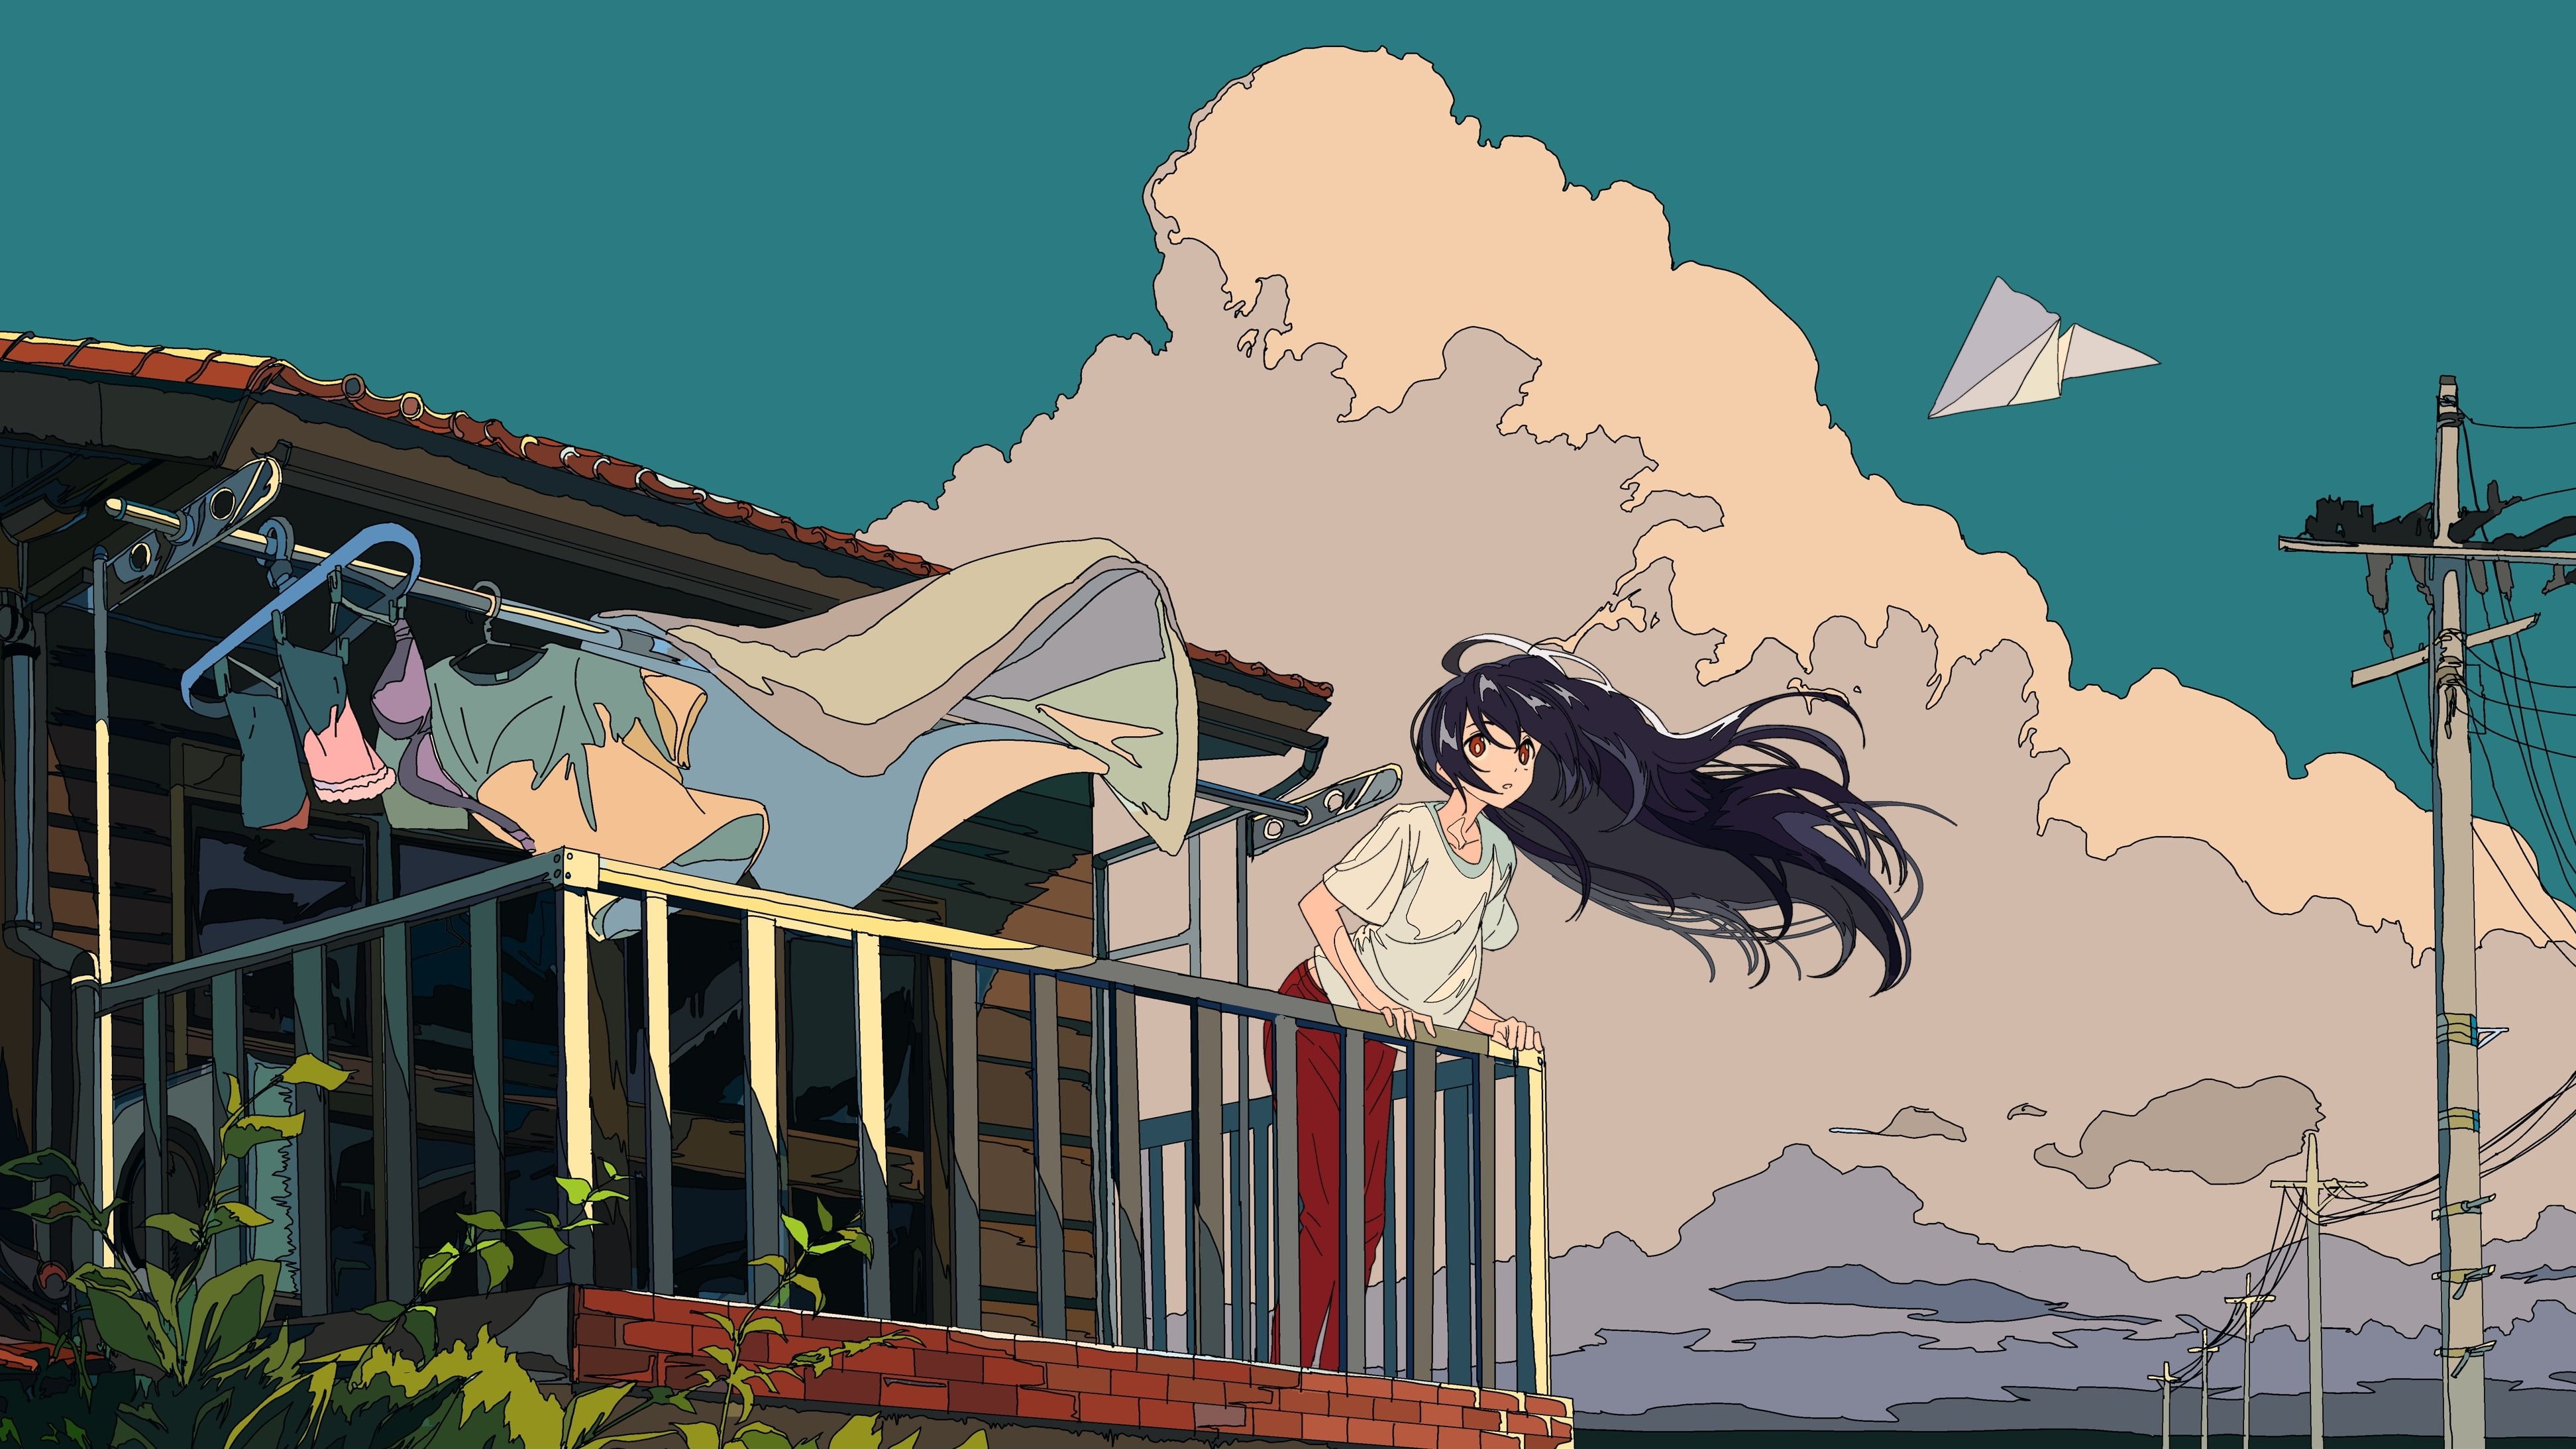 black haired girl anime character illustration #clouds #sky #cloth #buildin. Anime scenery wallpaper, Computer wallpaper desktop wallpaper, Desktop wallpaper art